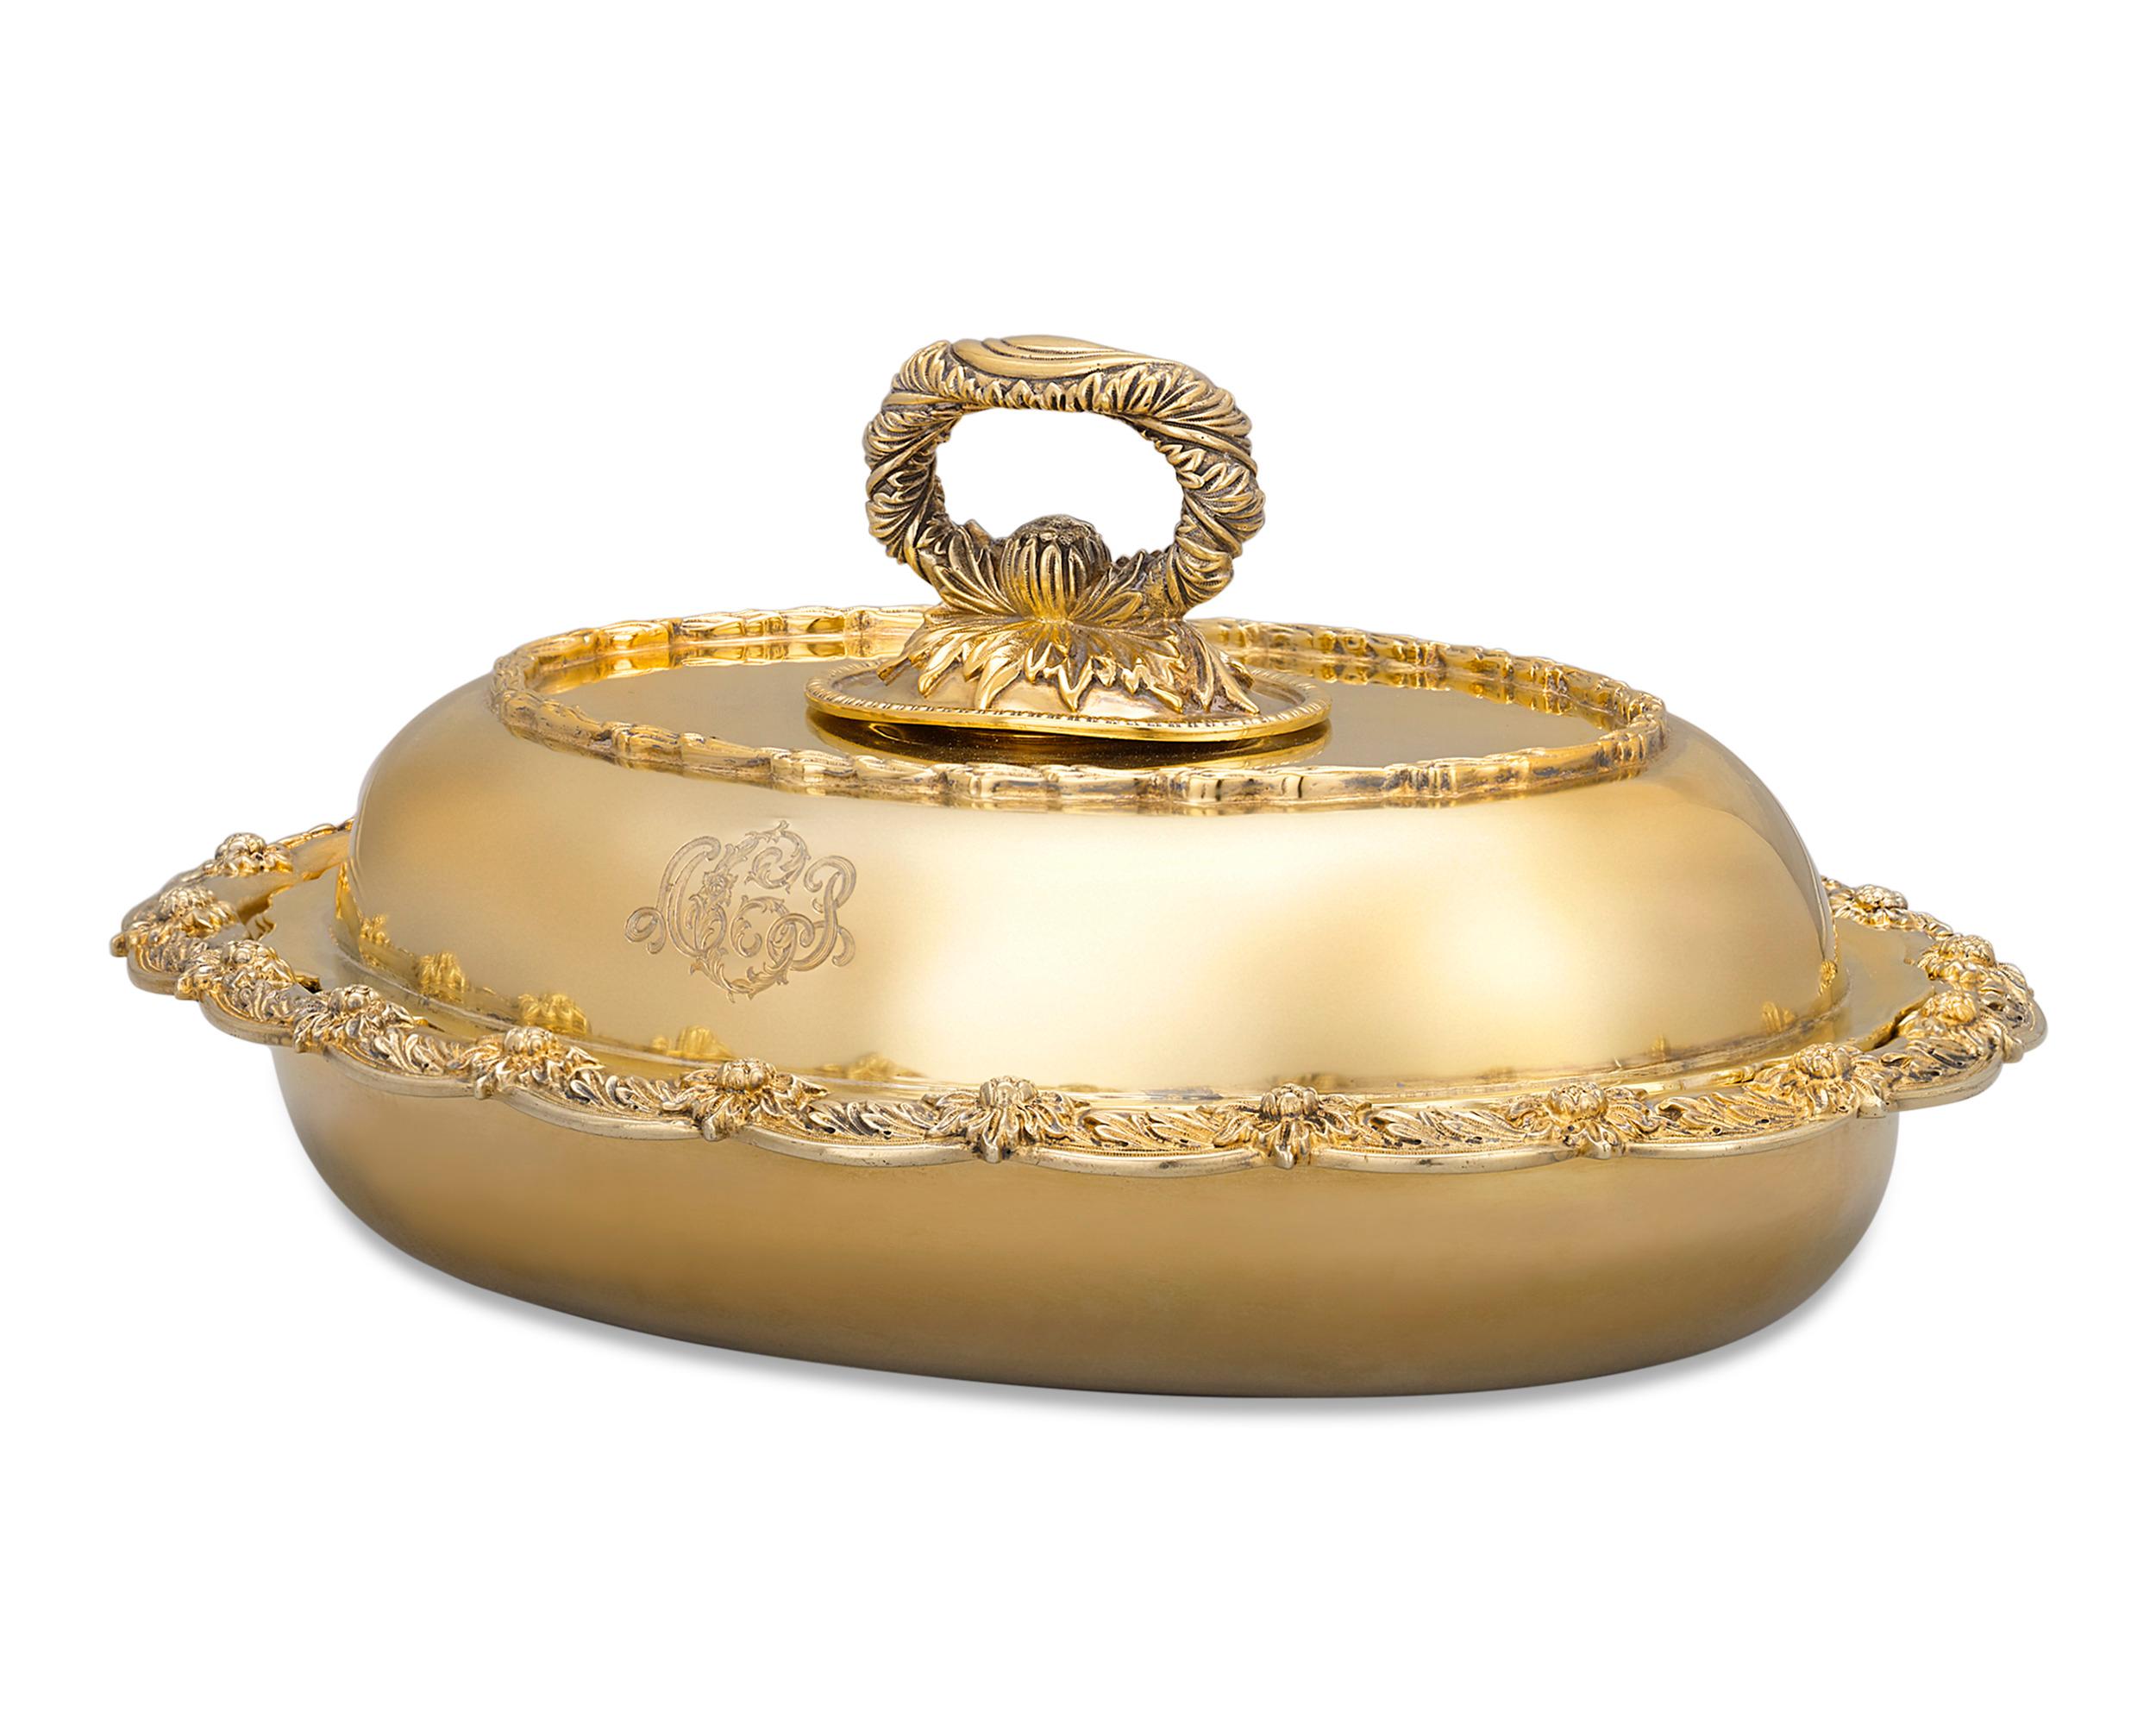 Created by the inimitable American silversmiths Tiffany & Co., this exceptionally rare silver gilt covered vegetable dish is fit for an elegant table. Crafted in the firm's highly coveted Chrysanthemum pattern, the dish is an exquisite example of